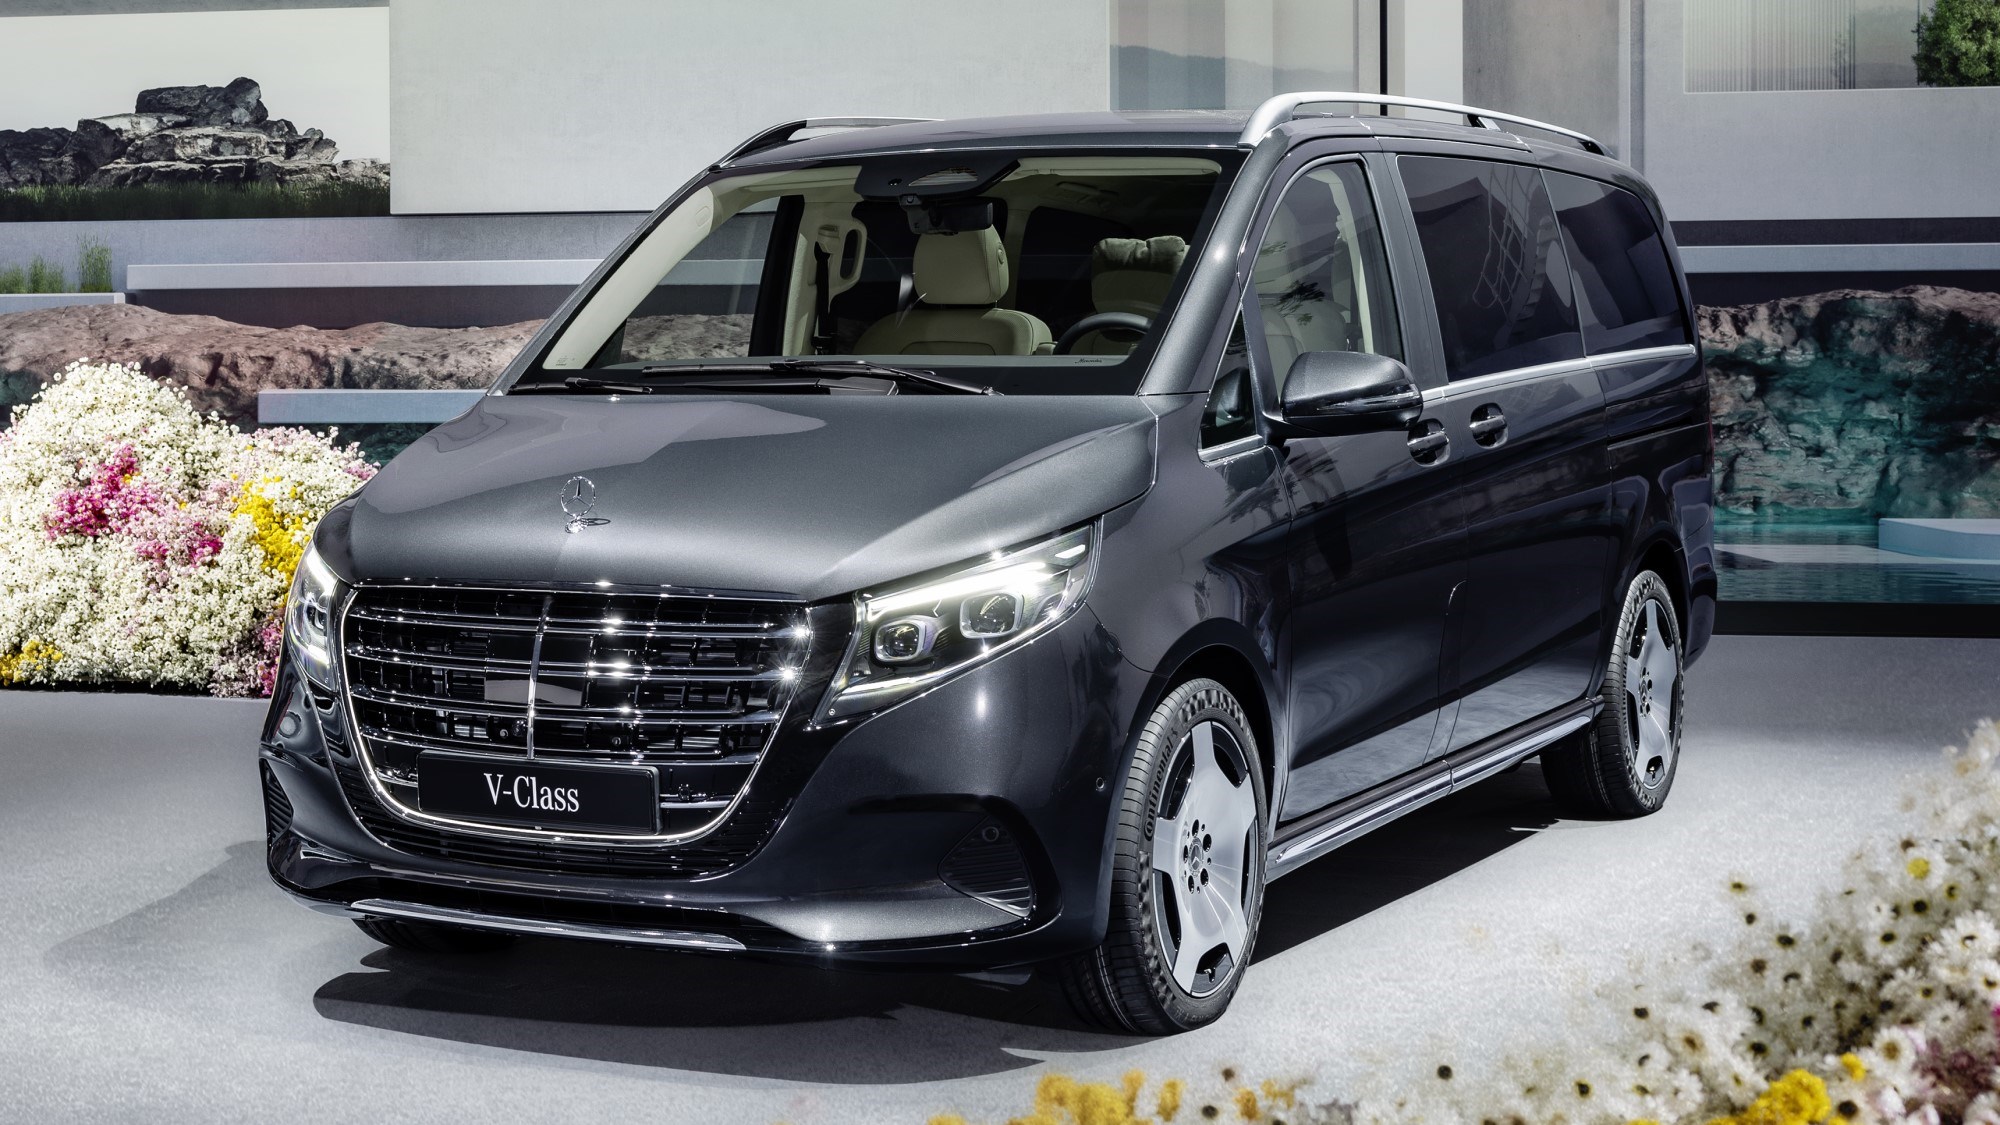 Mercedes Marco Polo updated, as V-Class promises S-Class lux in a